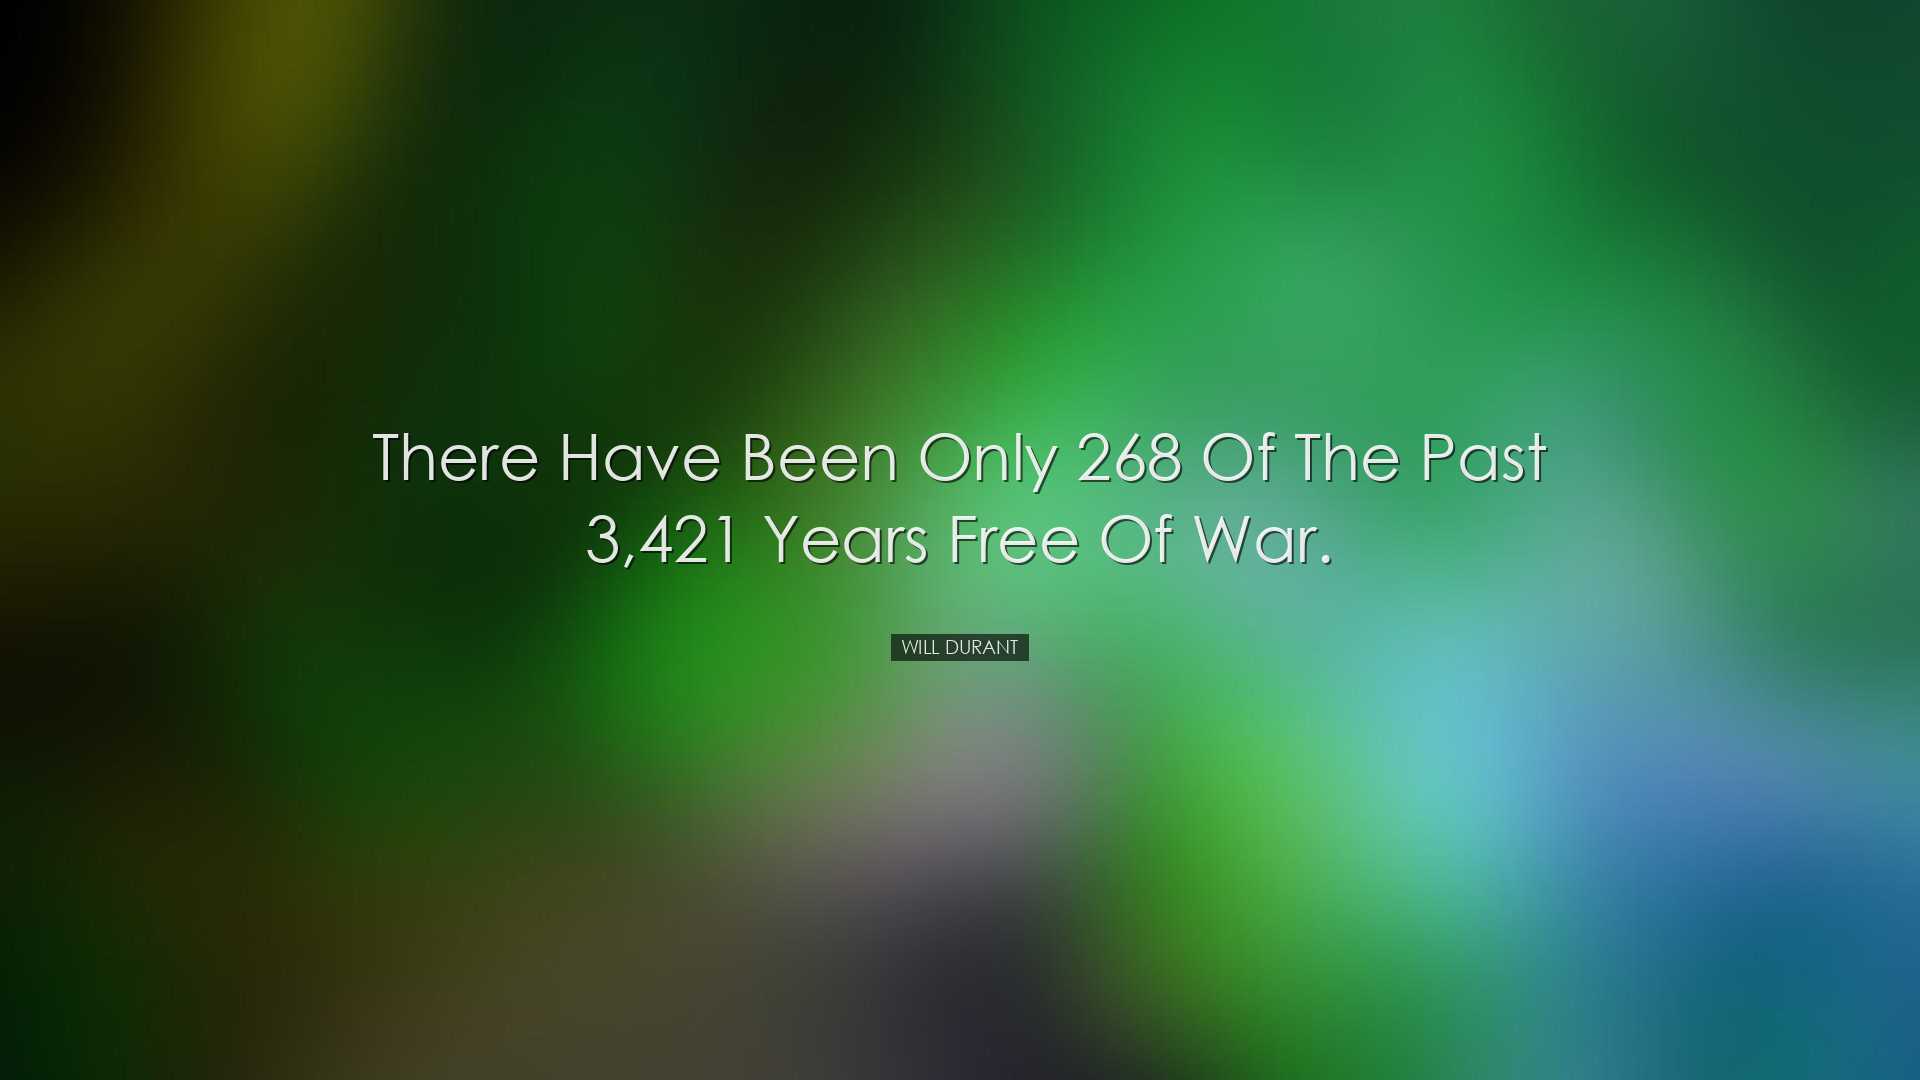 There have been only 268 of the past 3,421 years free of war. - Wi